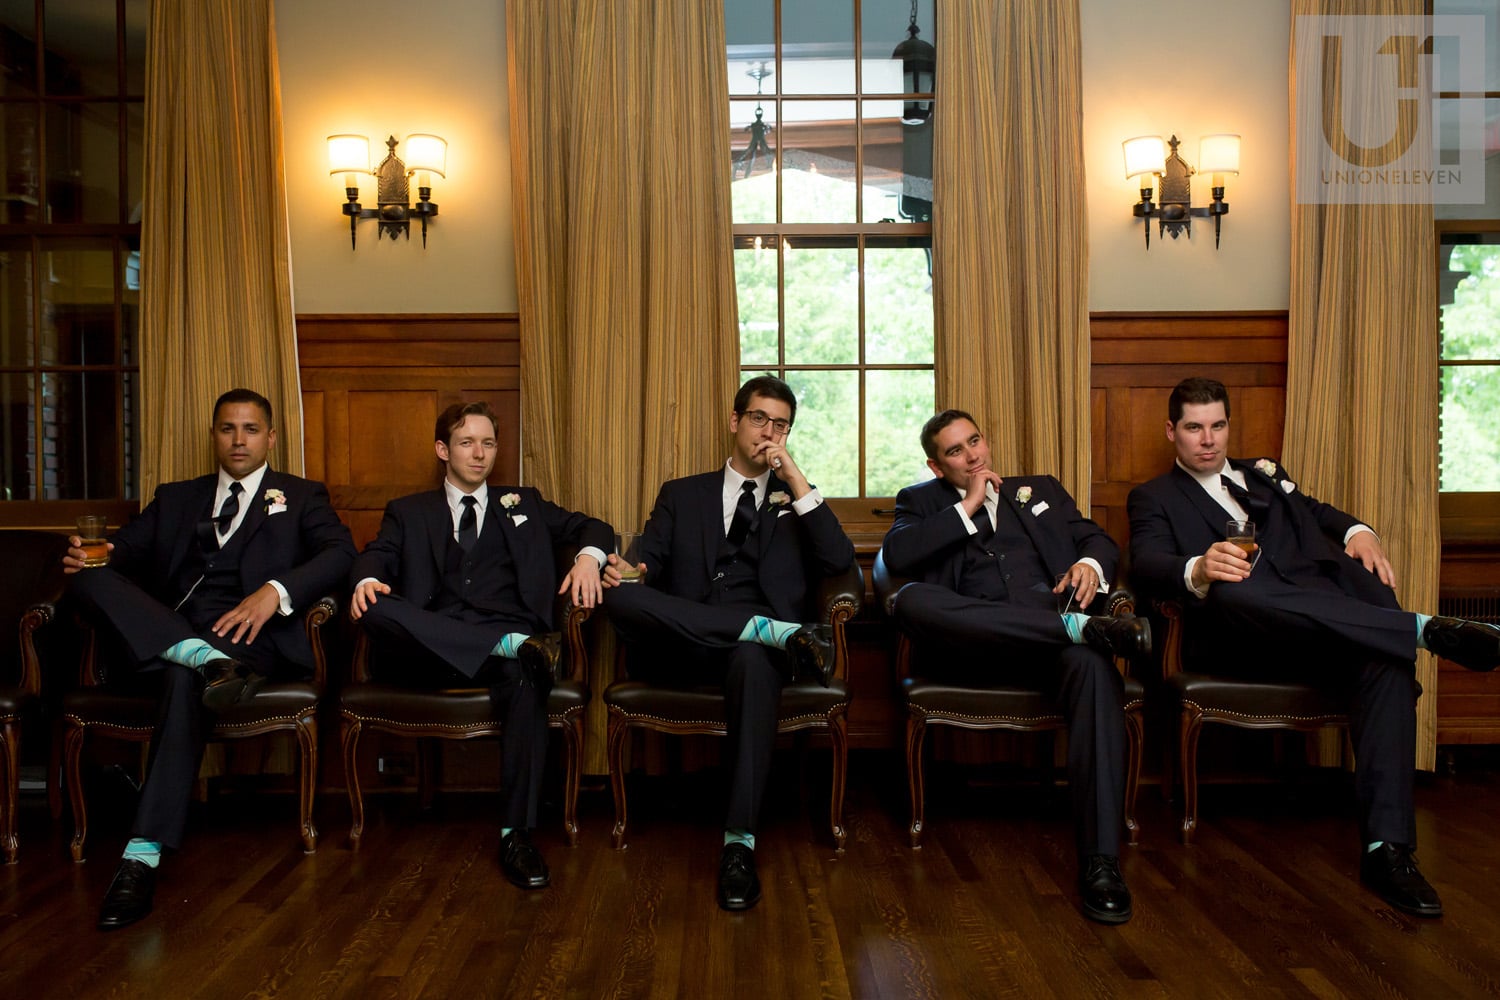 groomsmen sitting on chairs pensively at the Royal Ottawa Golf Club during wedding reception